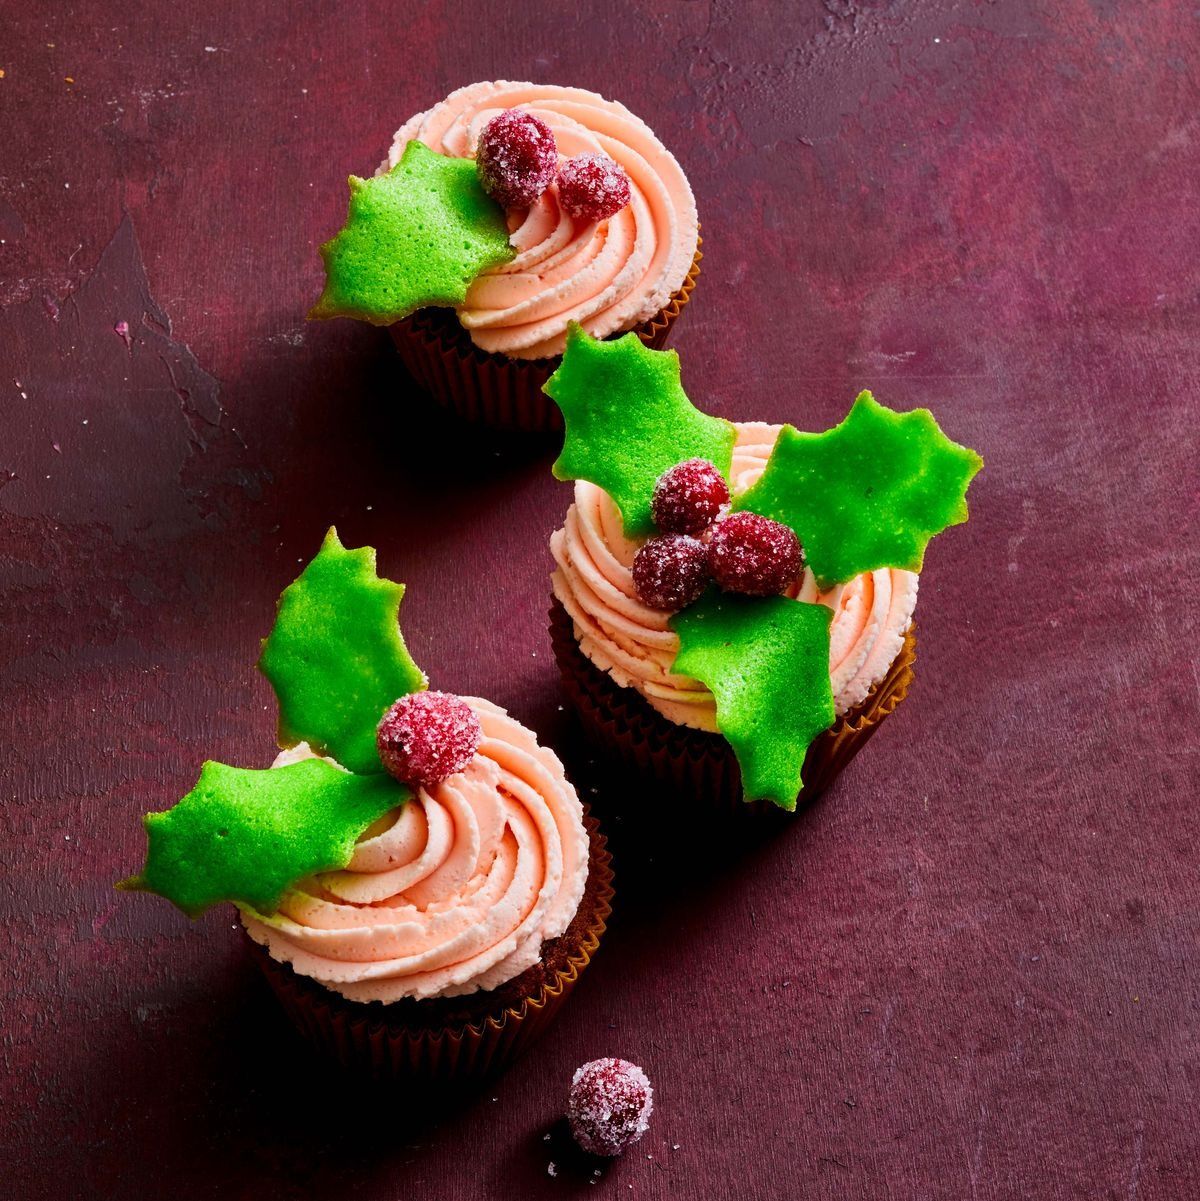 18 Cupcake Decorating Ideas You'll Love